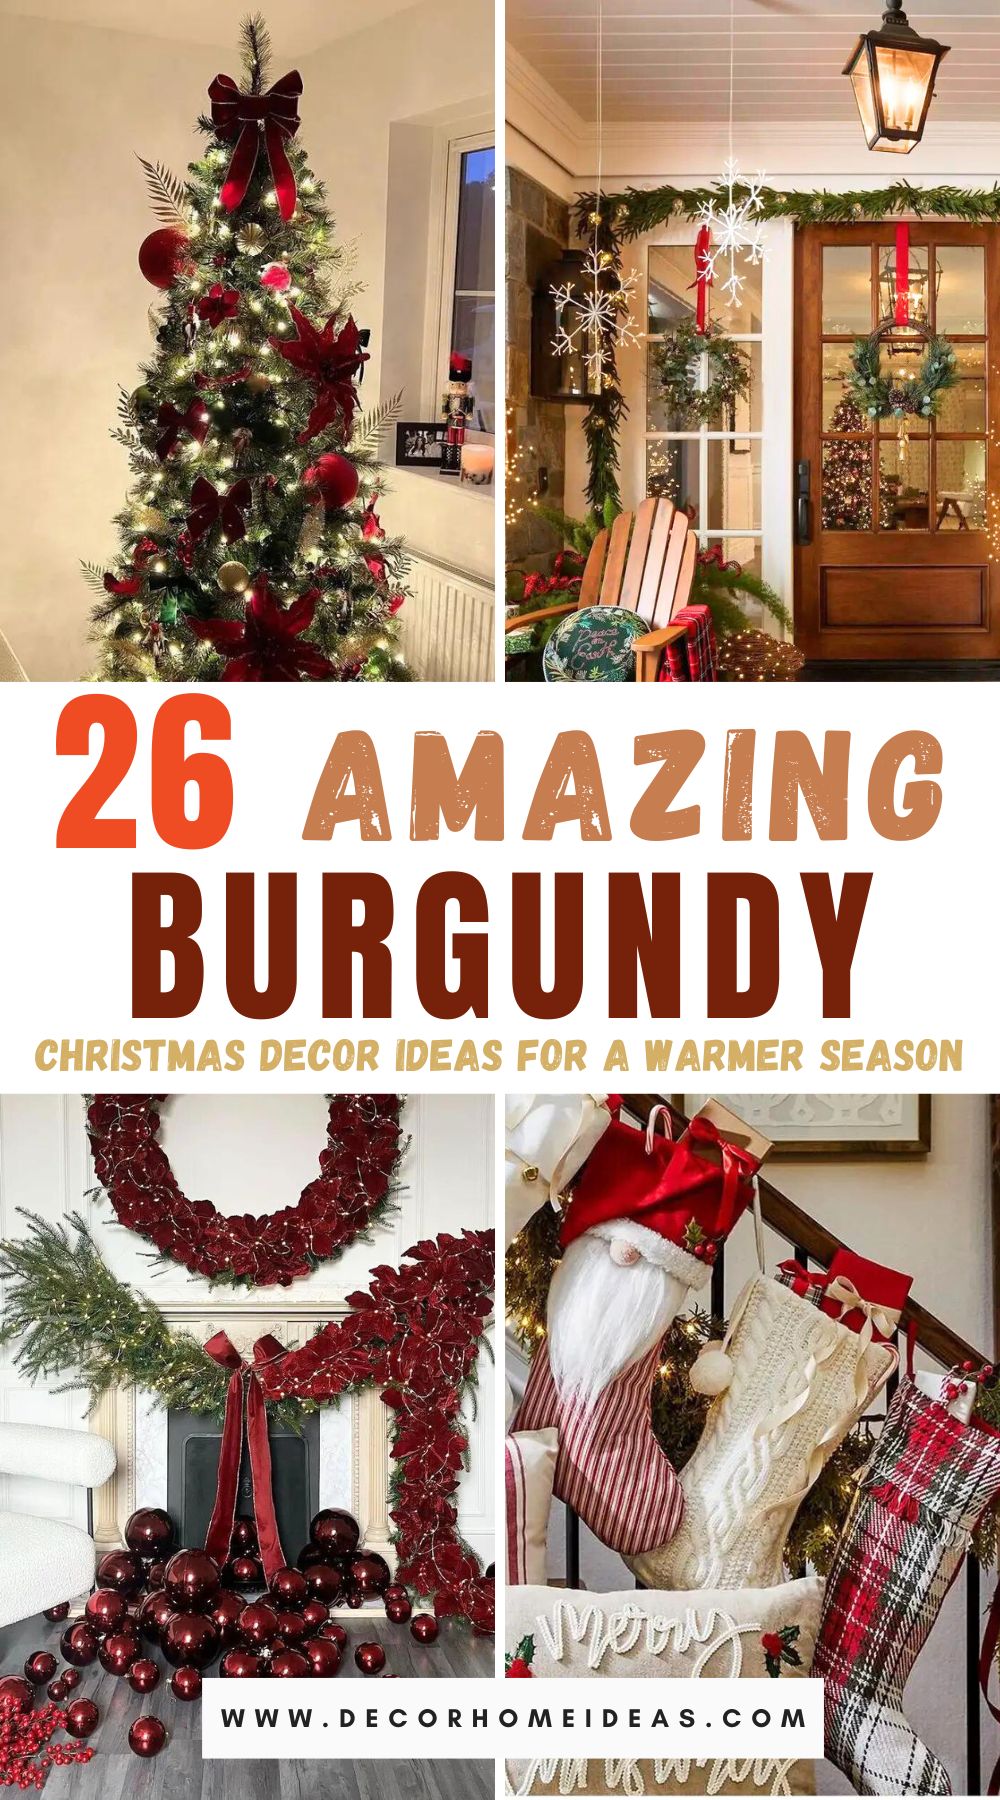 Seeking cozy warmth this holiday season? Explore 25 burgundy Christmas decor ideas. Dive into classic inspirations for a festive home.